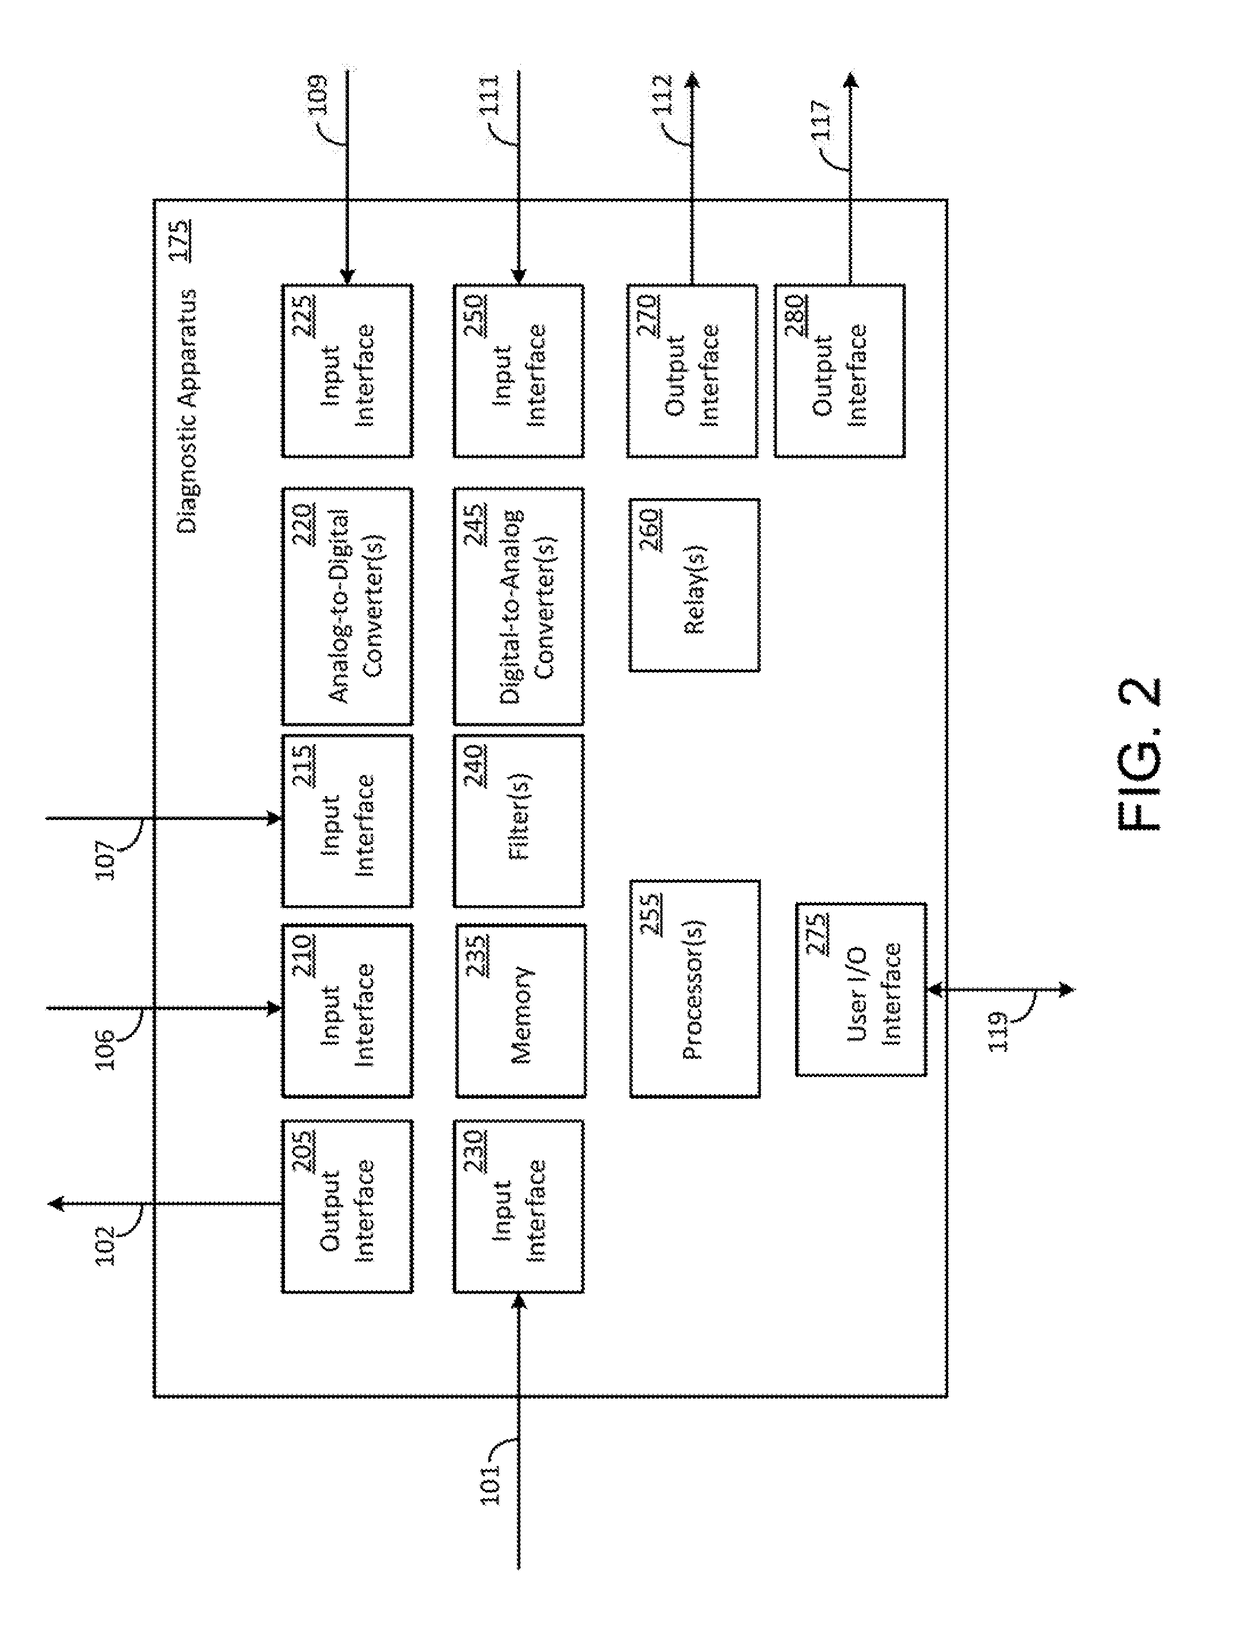 Systems and methods for monitoring and diagnosing transformer health